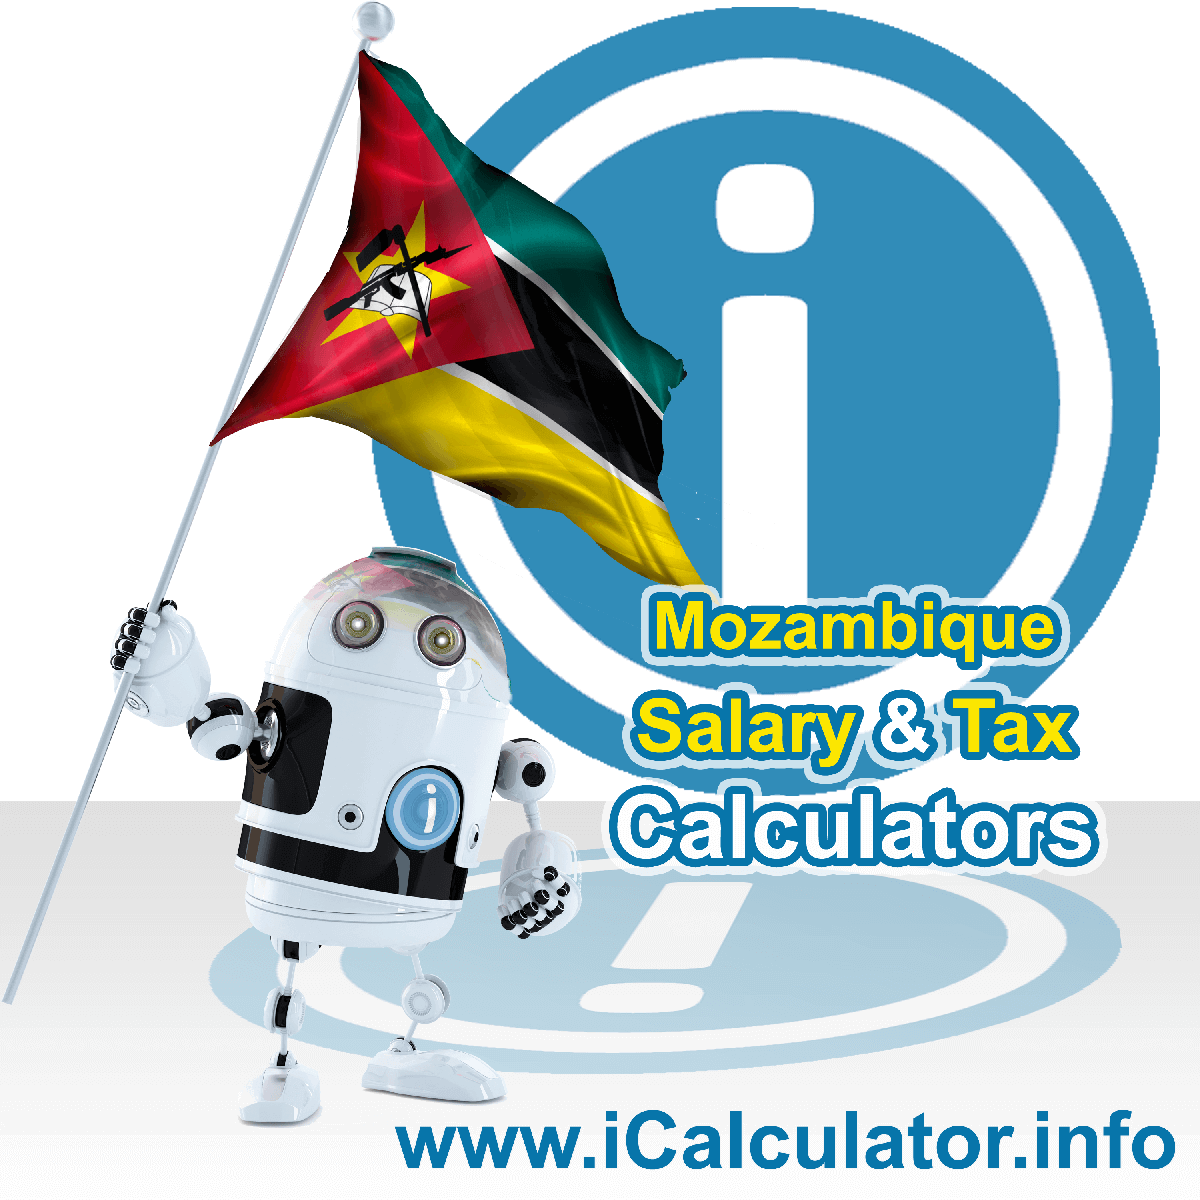 Mozambique Tax Calculator. This image shows the Mozambique flag and information relating to the tax formula for the Mozambique Salary Calculator